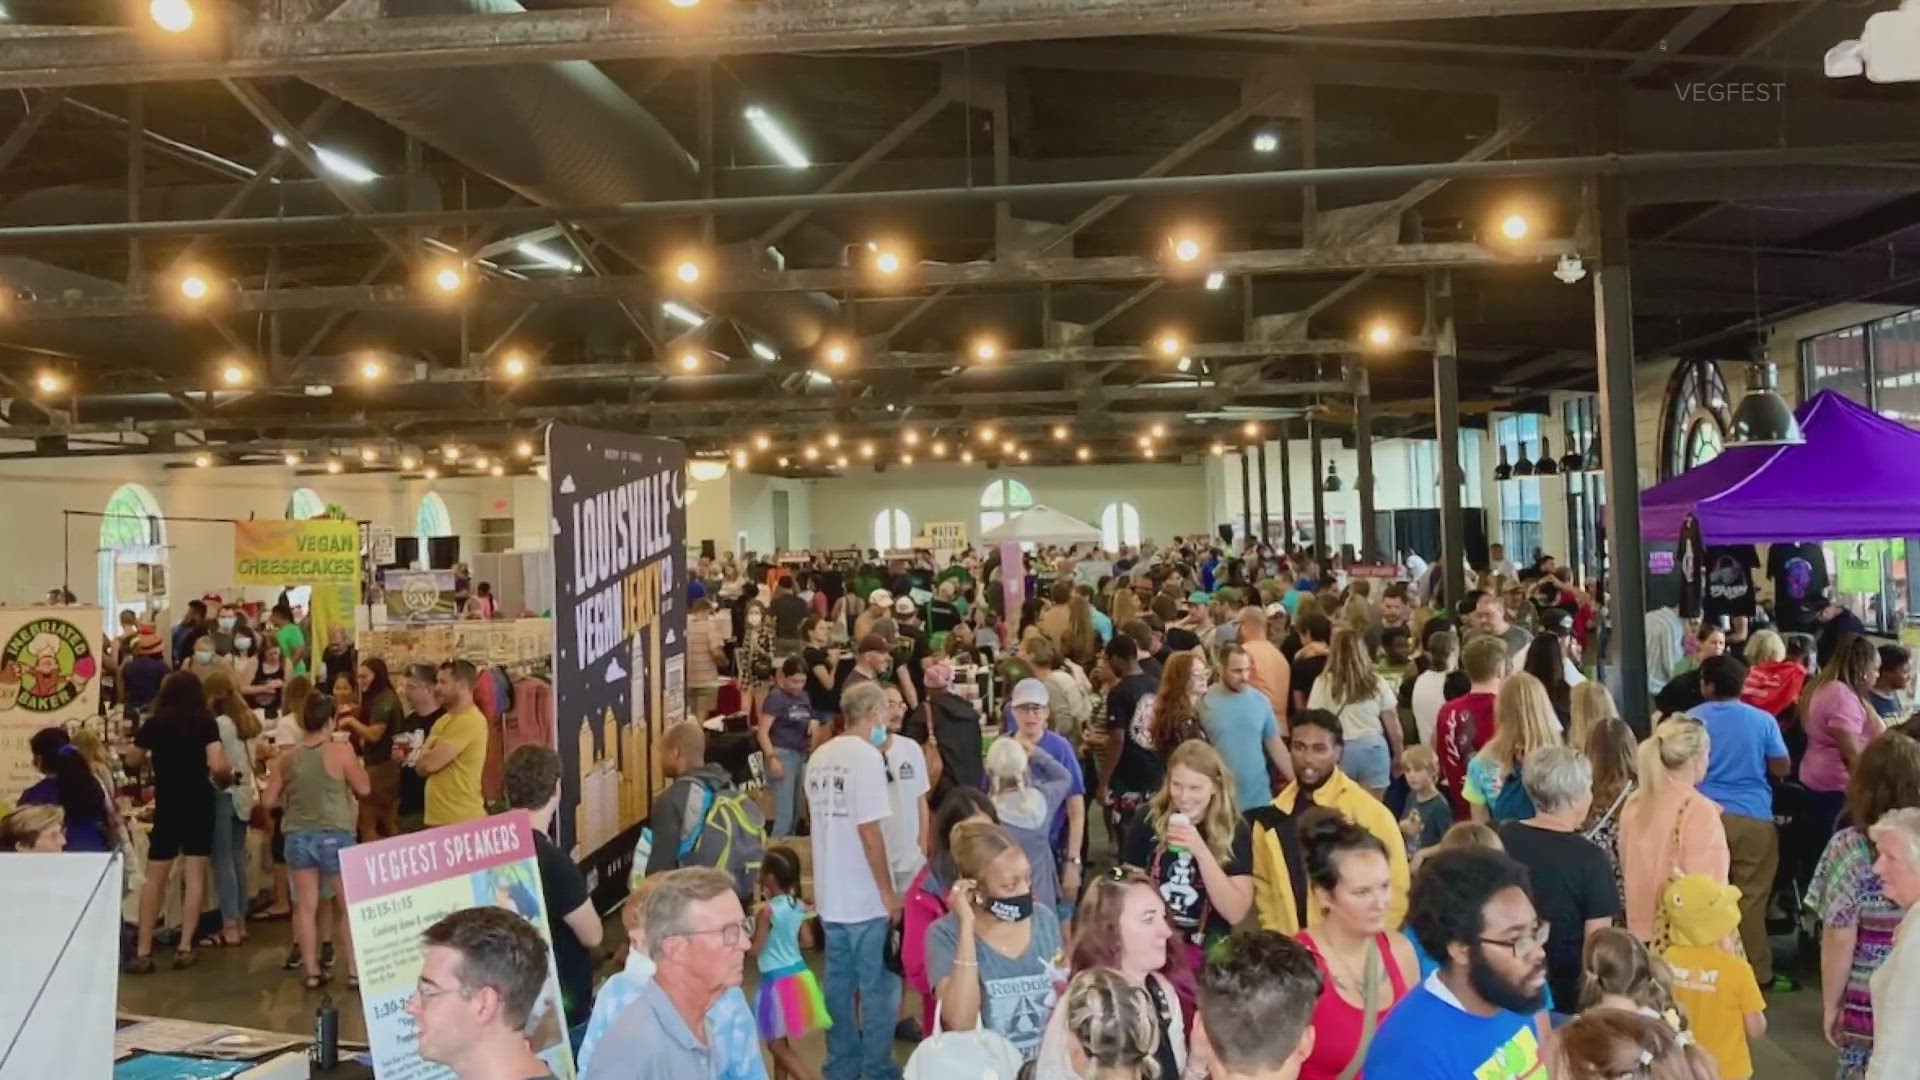 Bluegrass VegFest will take over the Mellwood Art Center on Saturday, July 15.